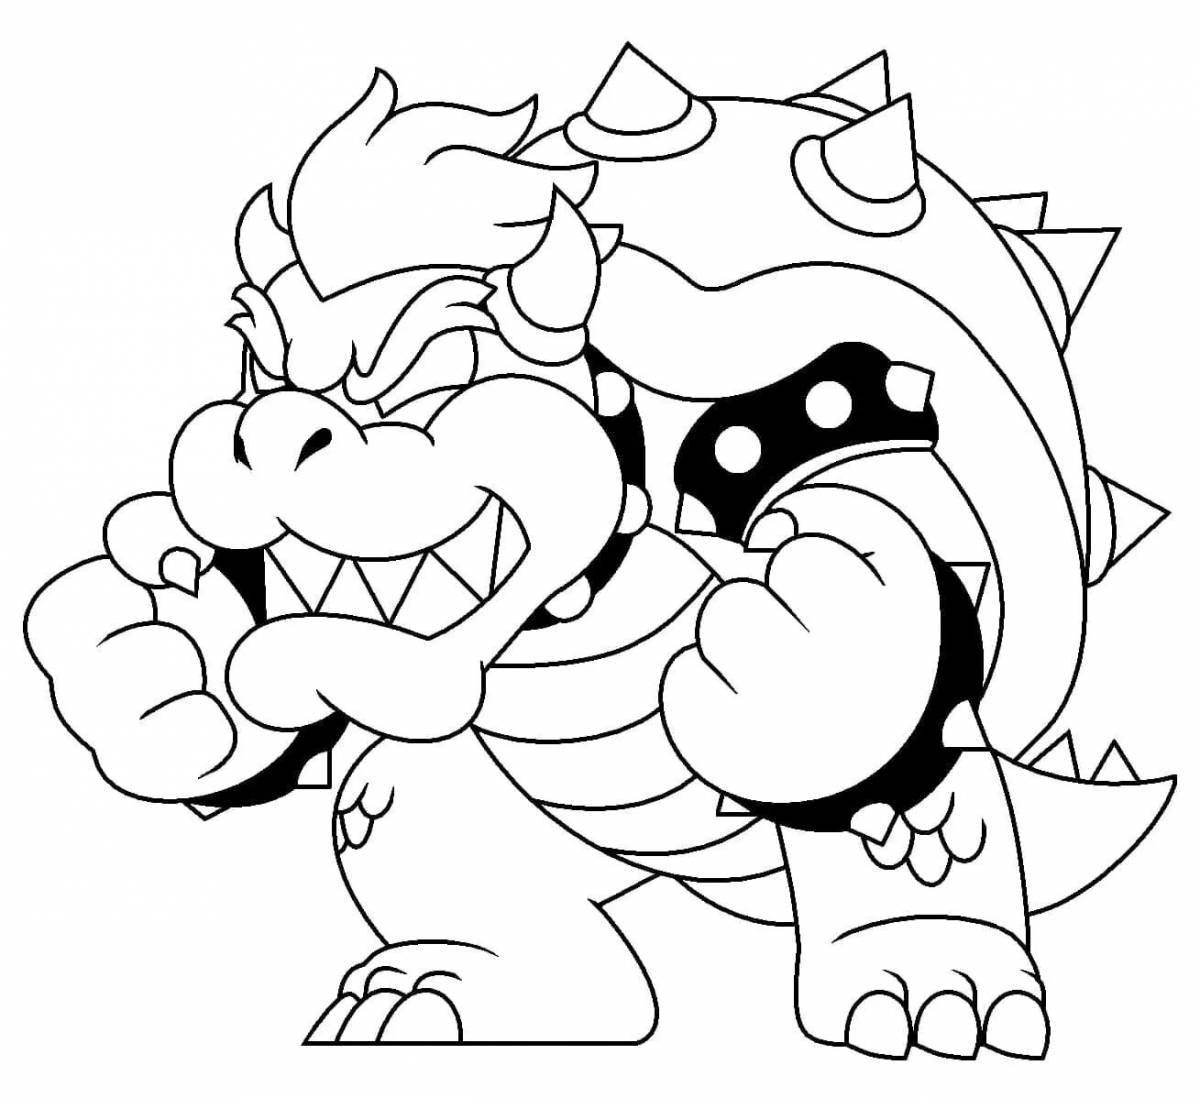 Bold coloring bowser